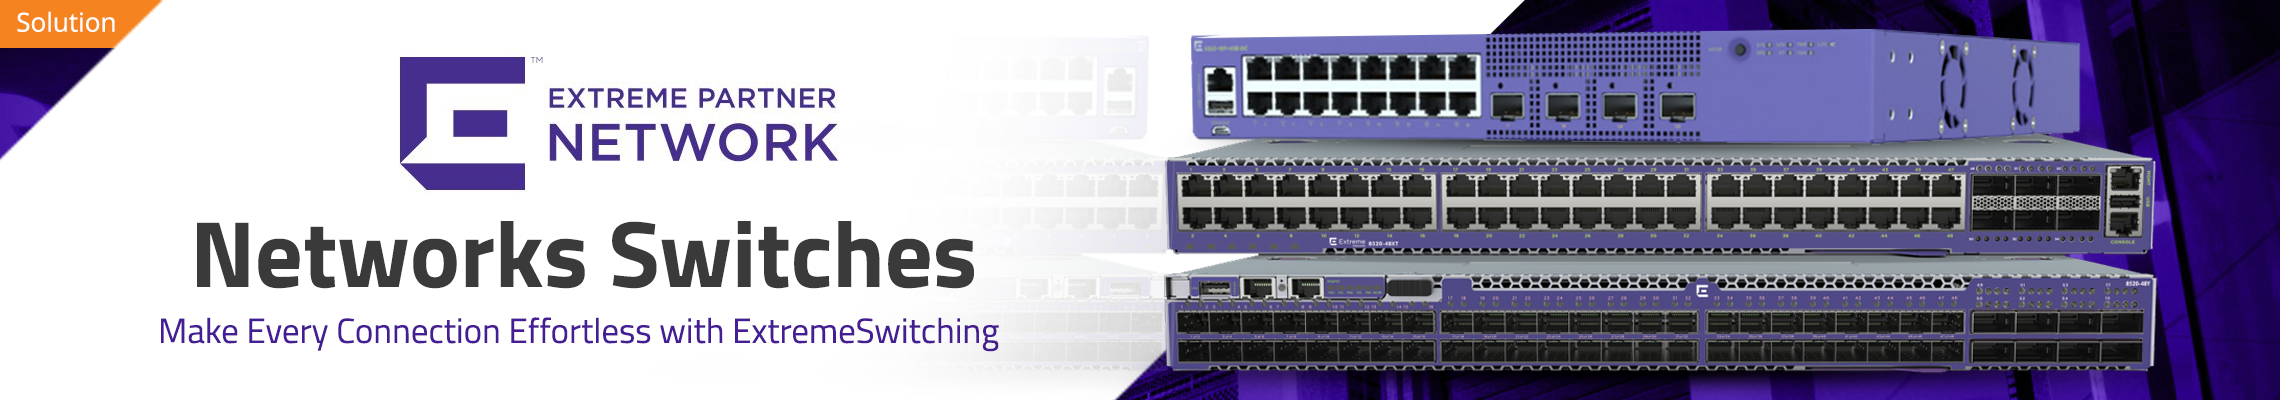 Networks Switches - Make every connection effortless with ExtremeSwitching